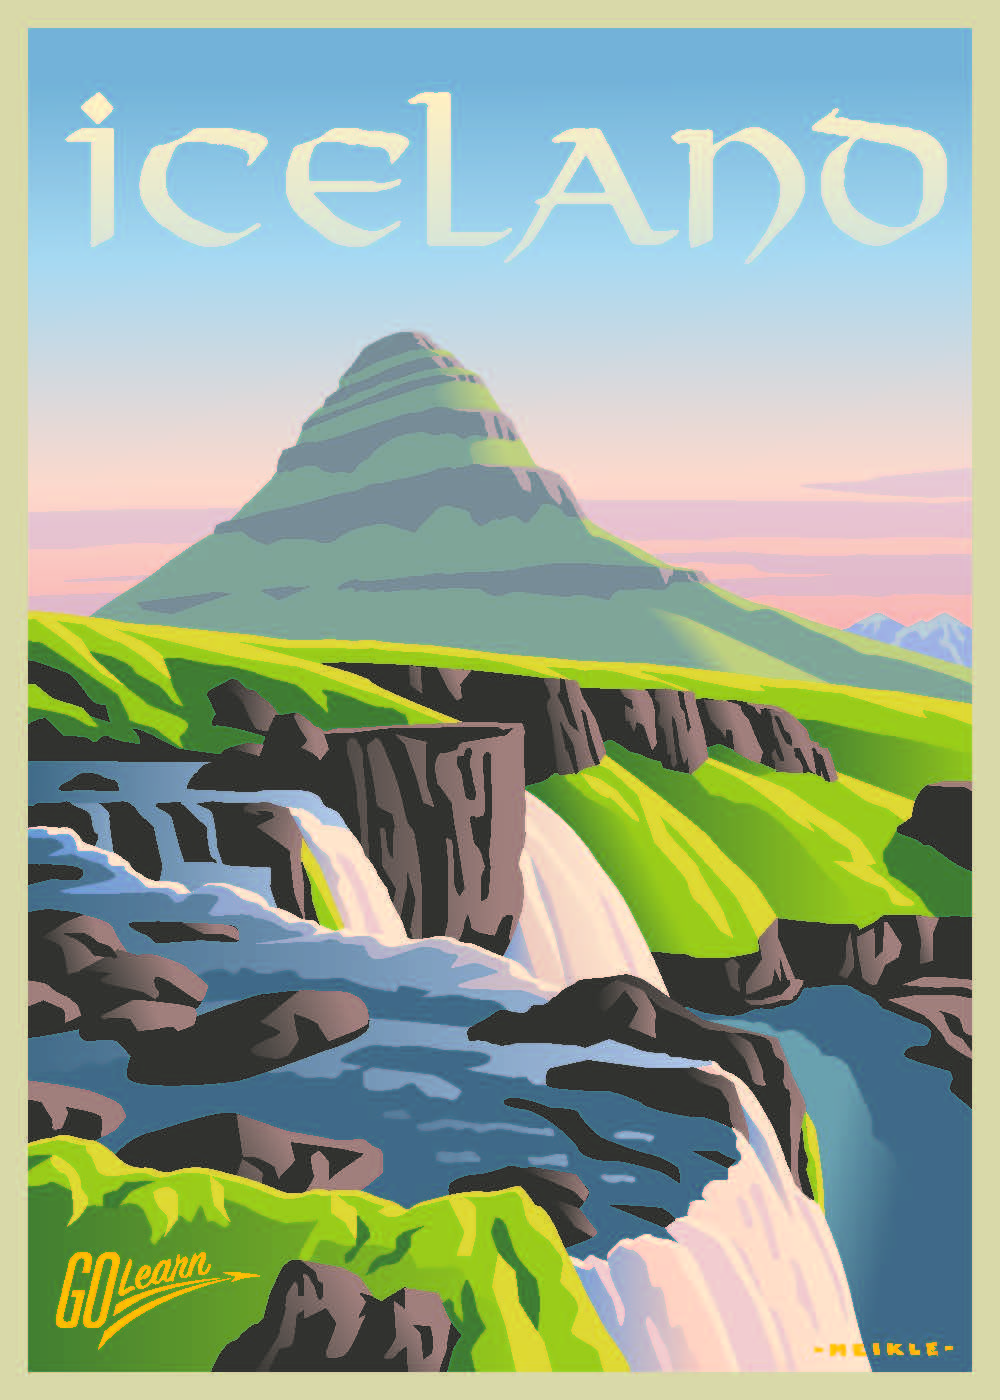 Iceland: Land of Fire and Ice Go Learn poster